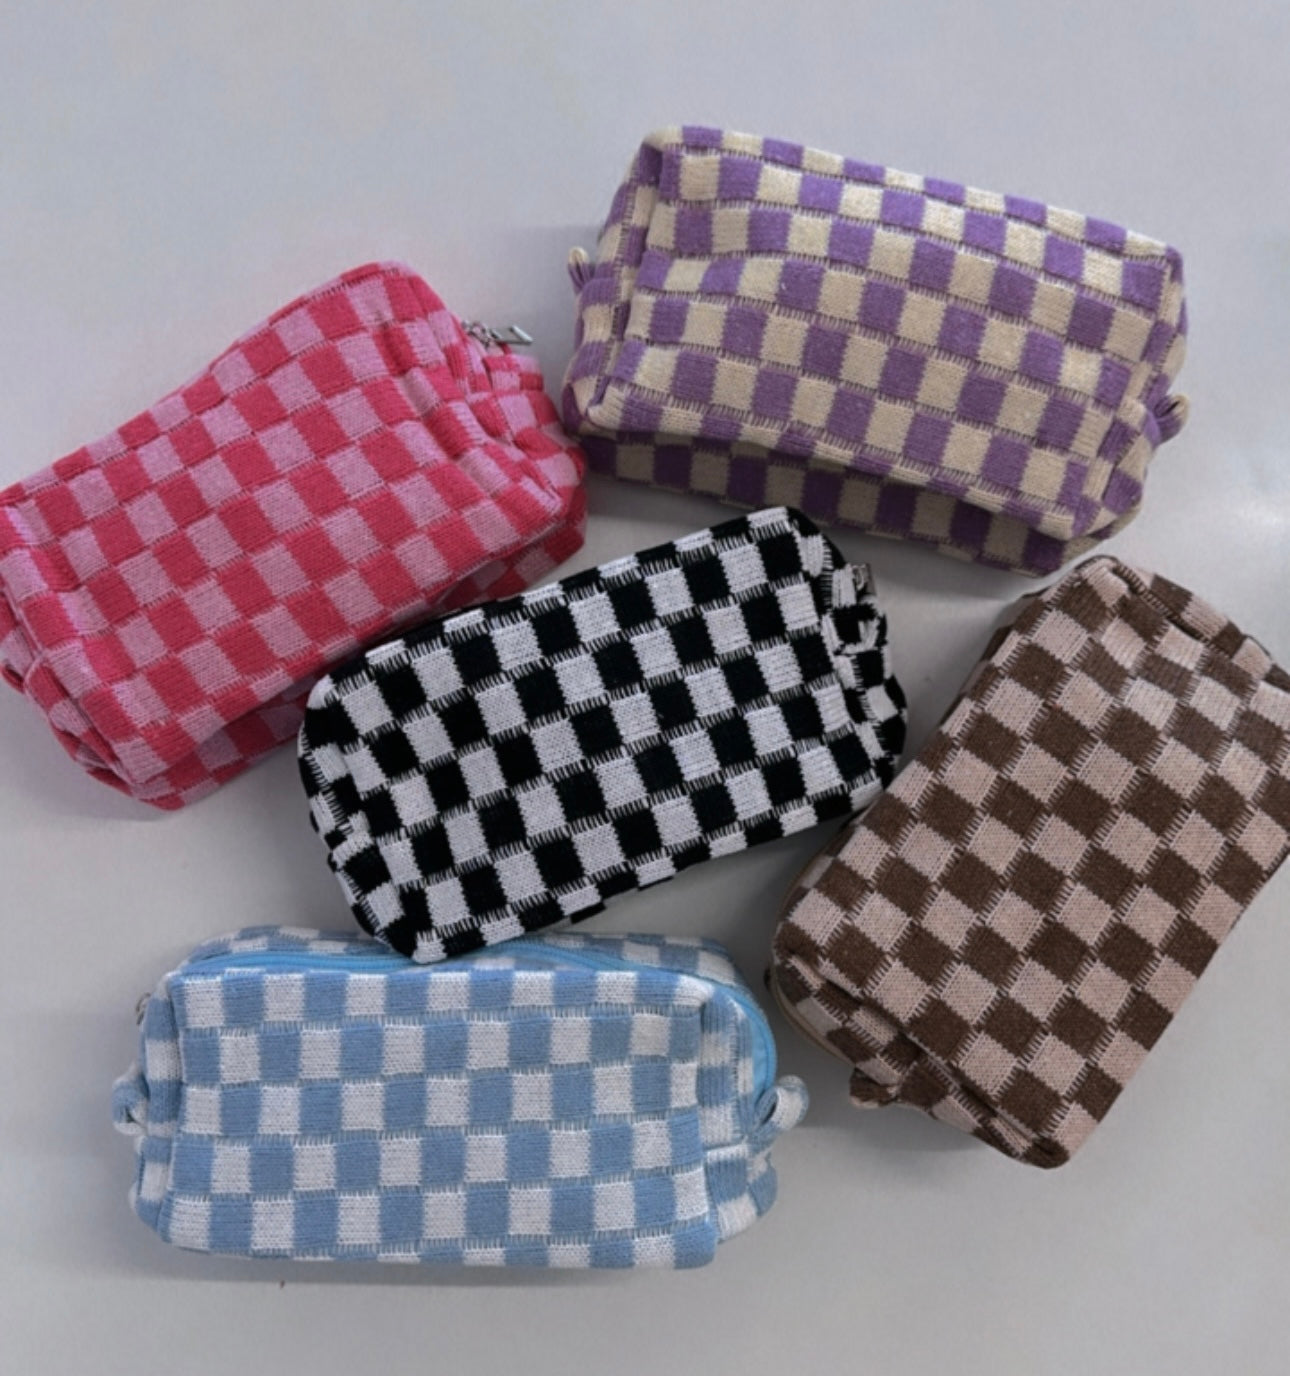 Checkered cosmetic bag